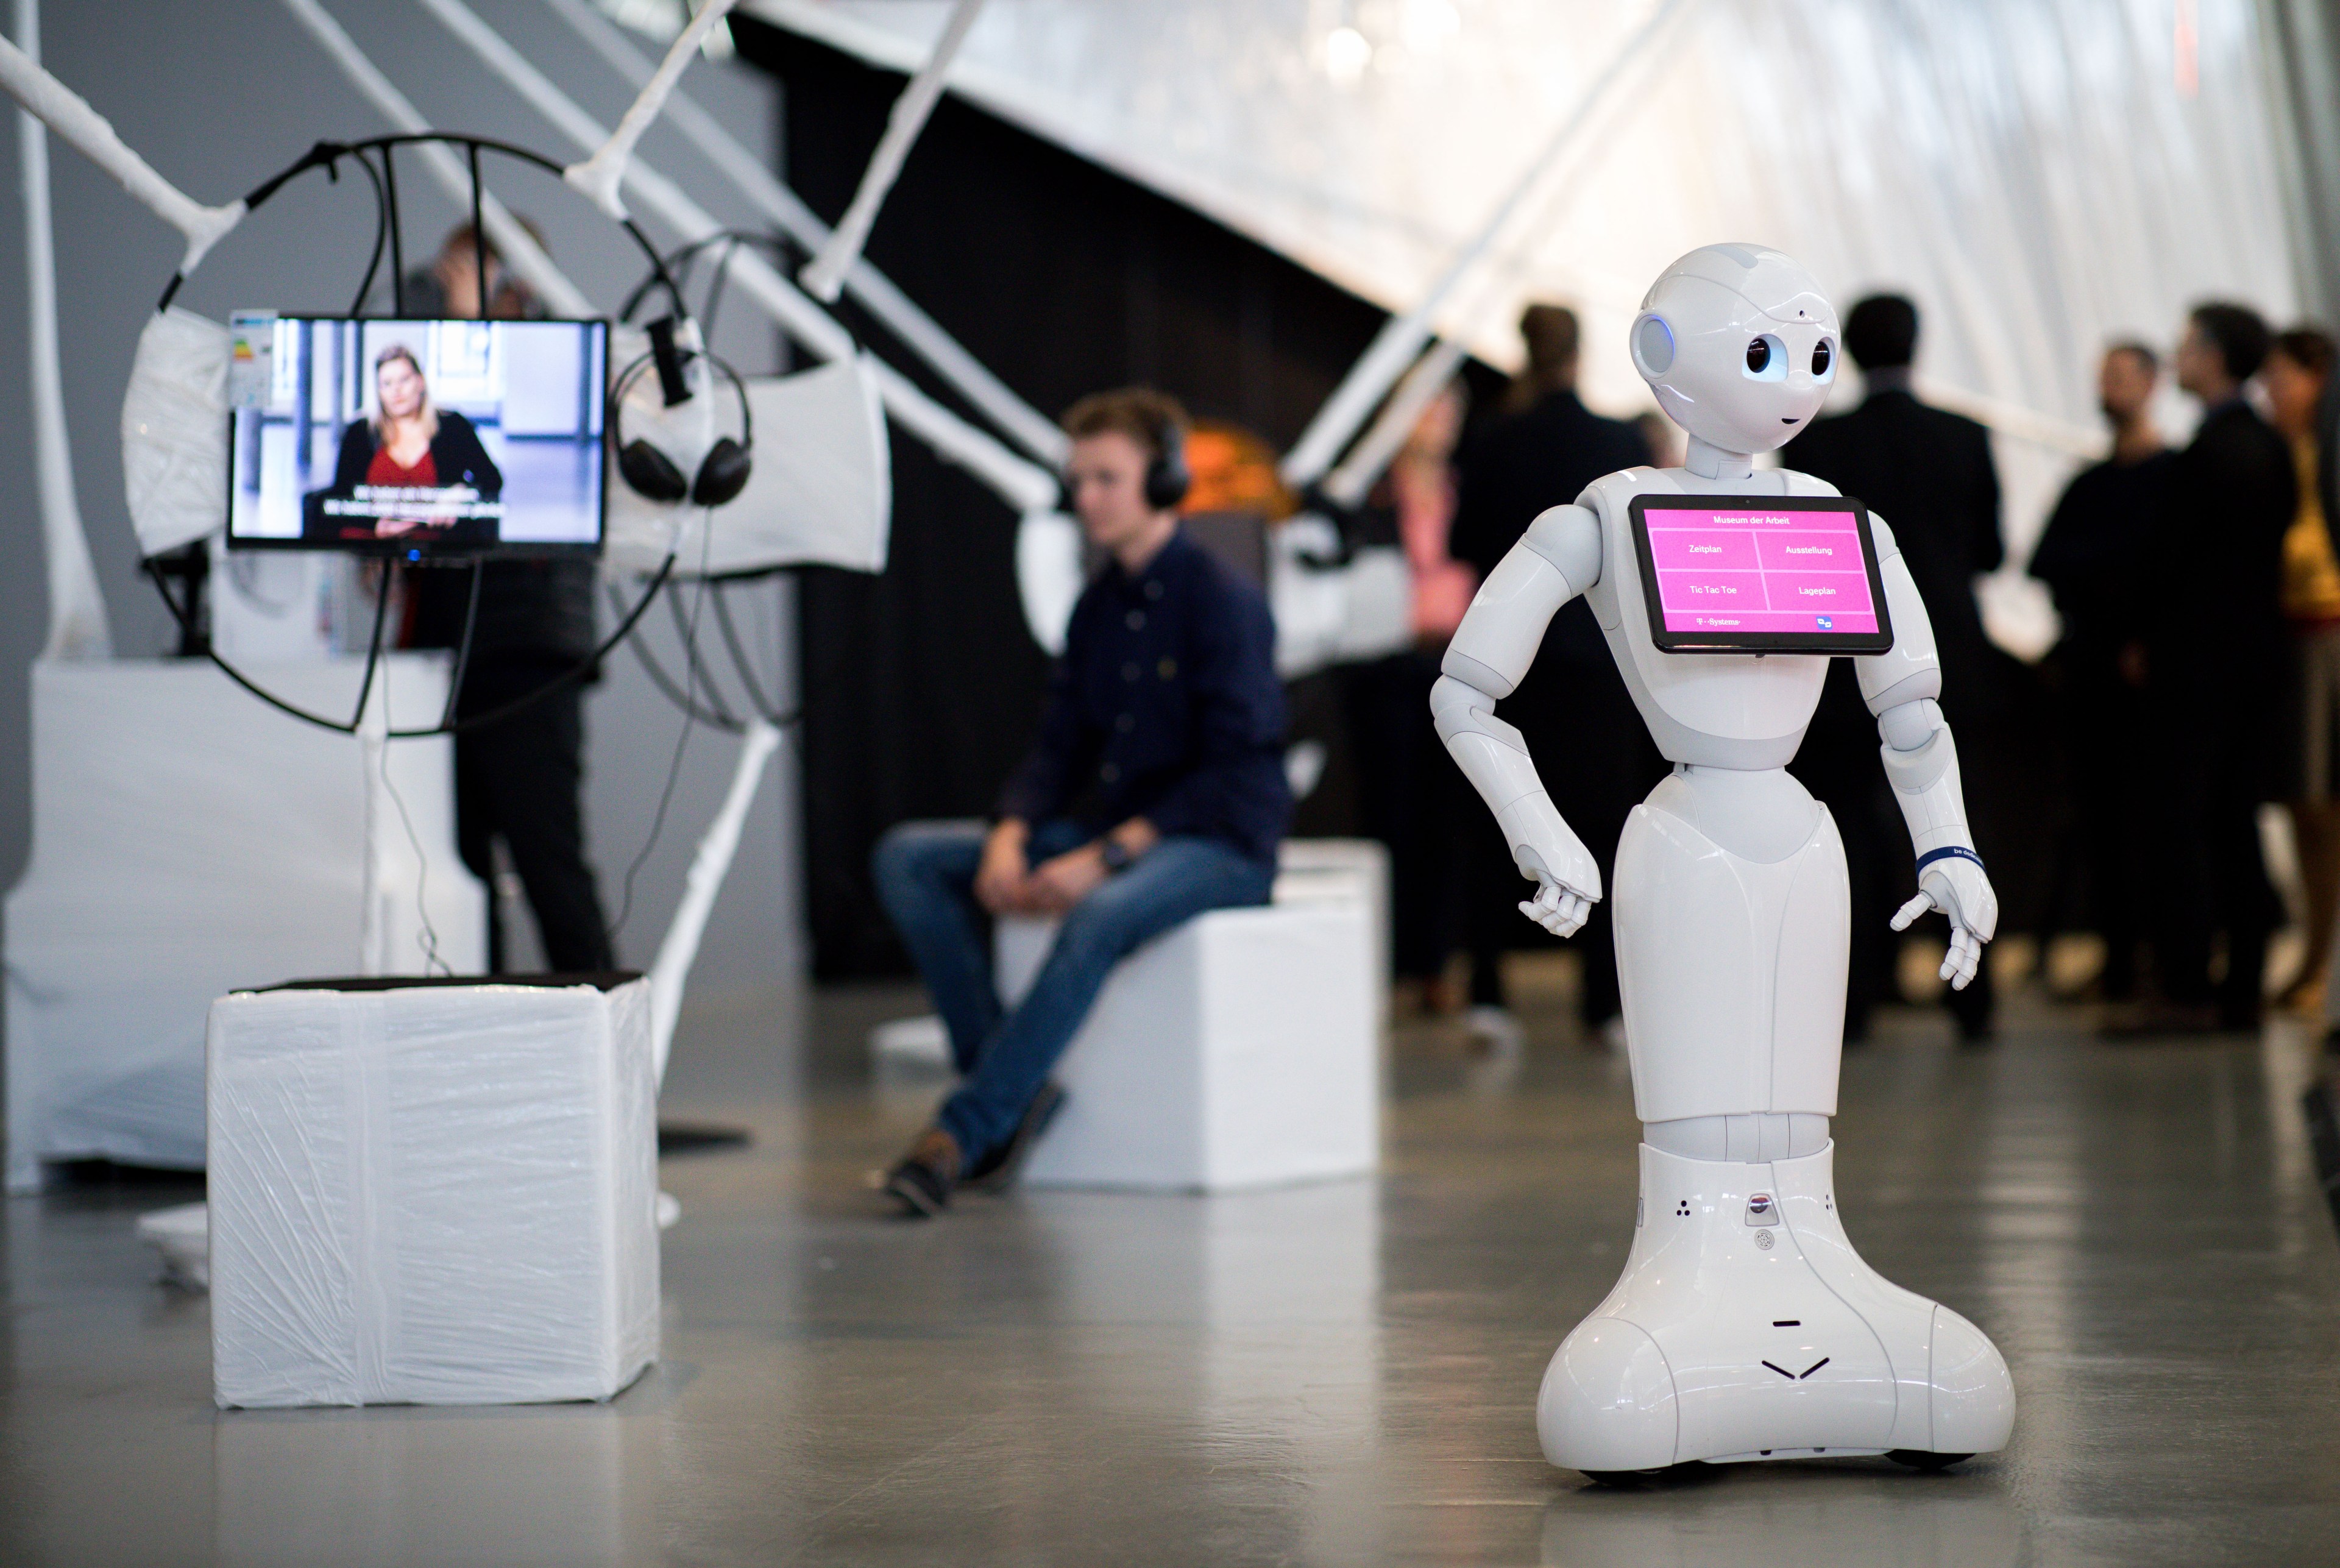 A humanoid robot with a screen on its chest stands in an exhibit hall near a man seated in the background.